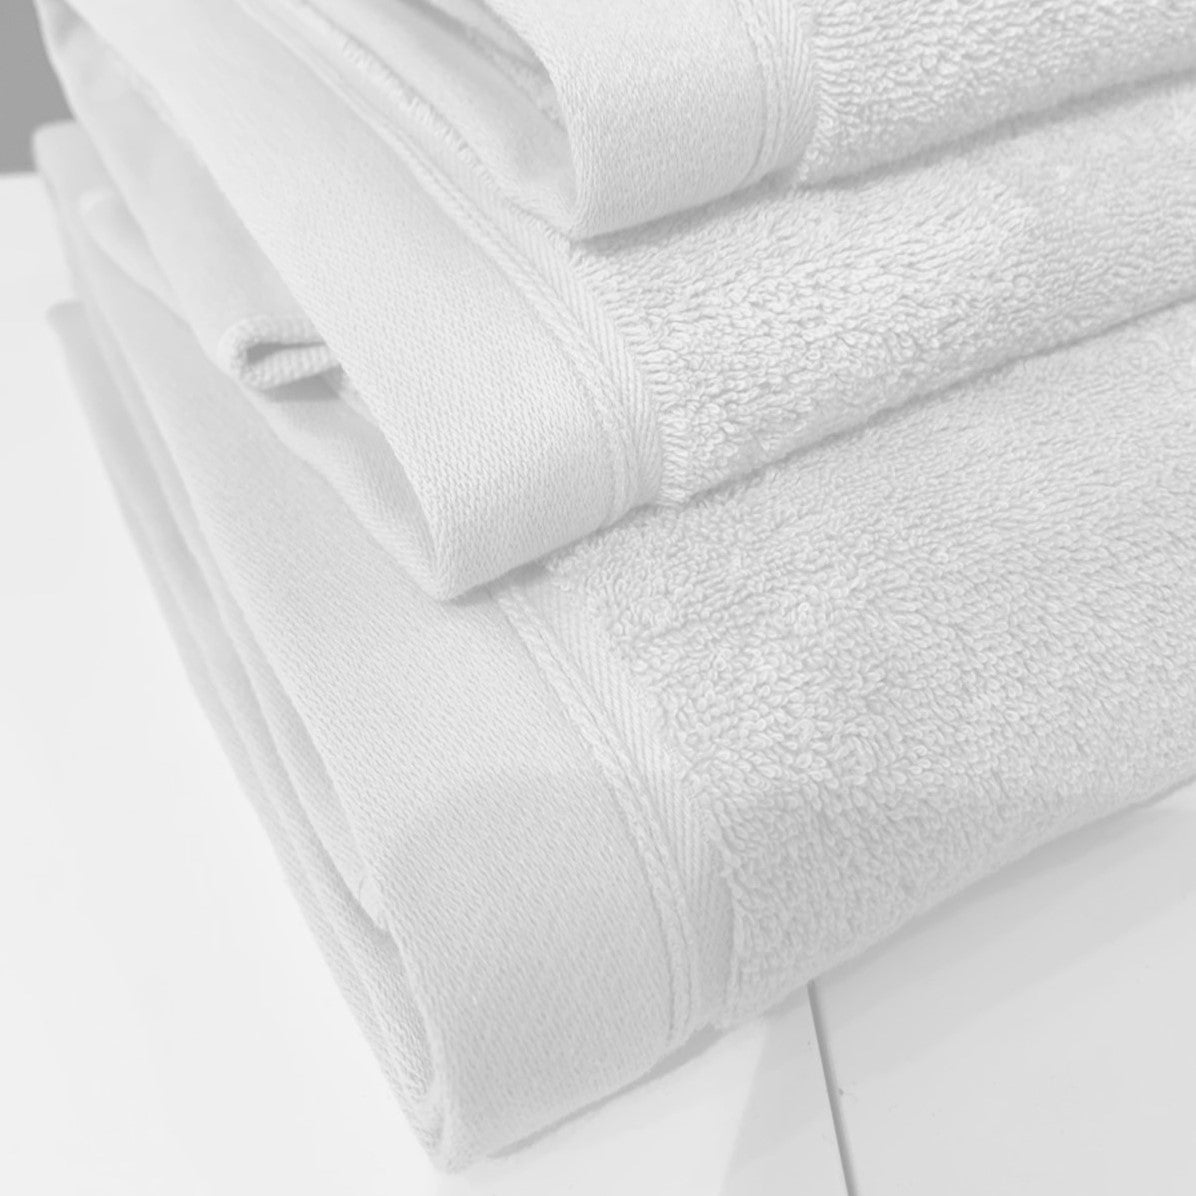 Isella 700gsm Organic Cotton Towel Collection